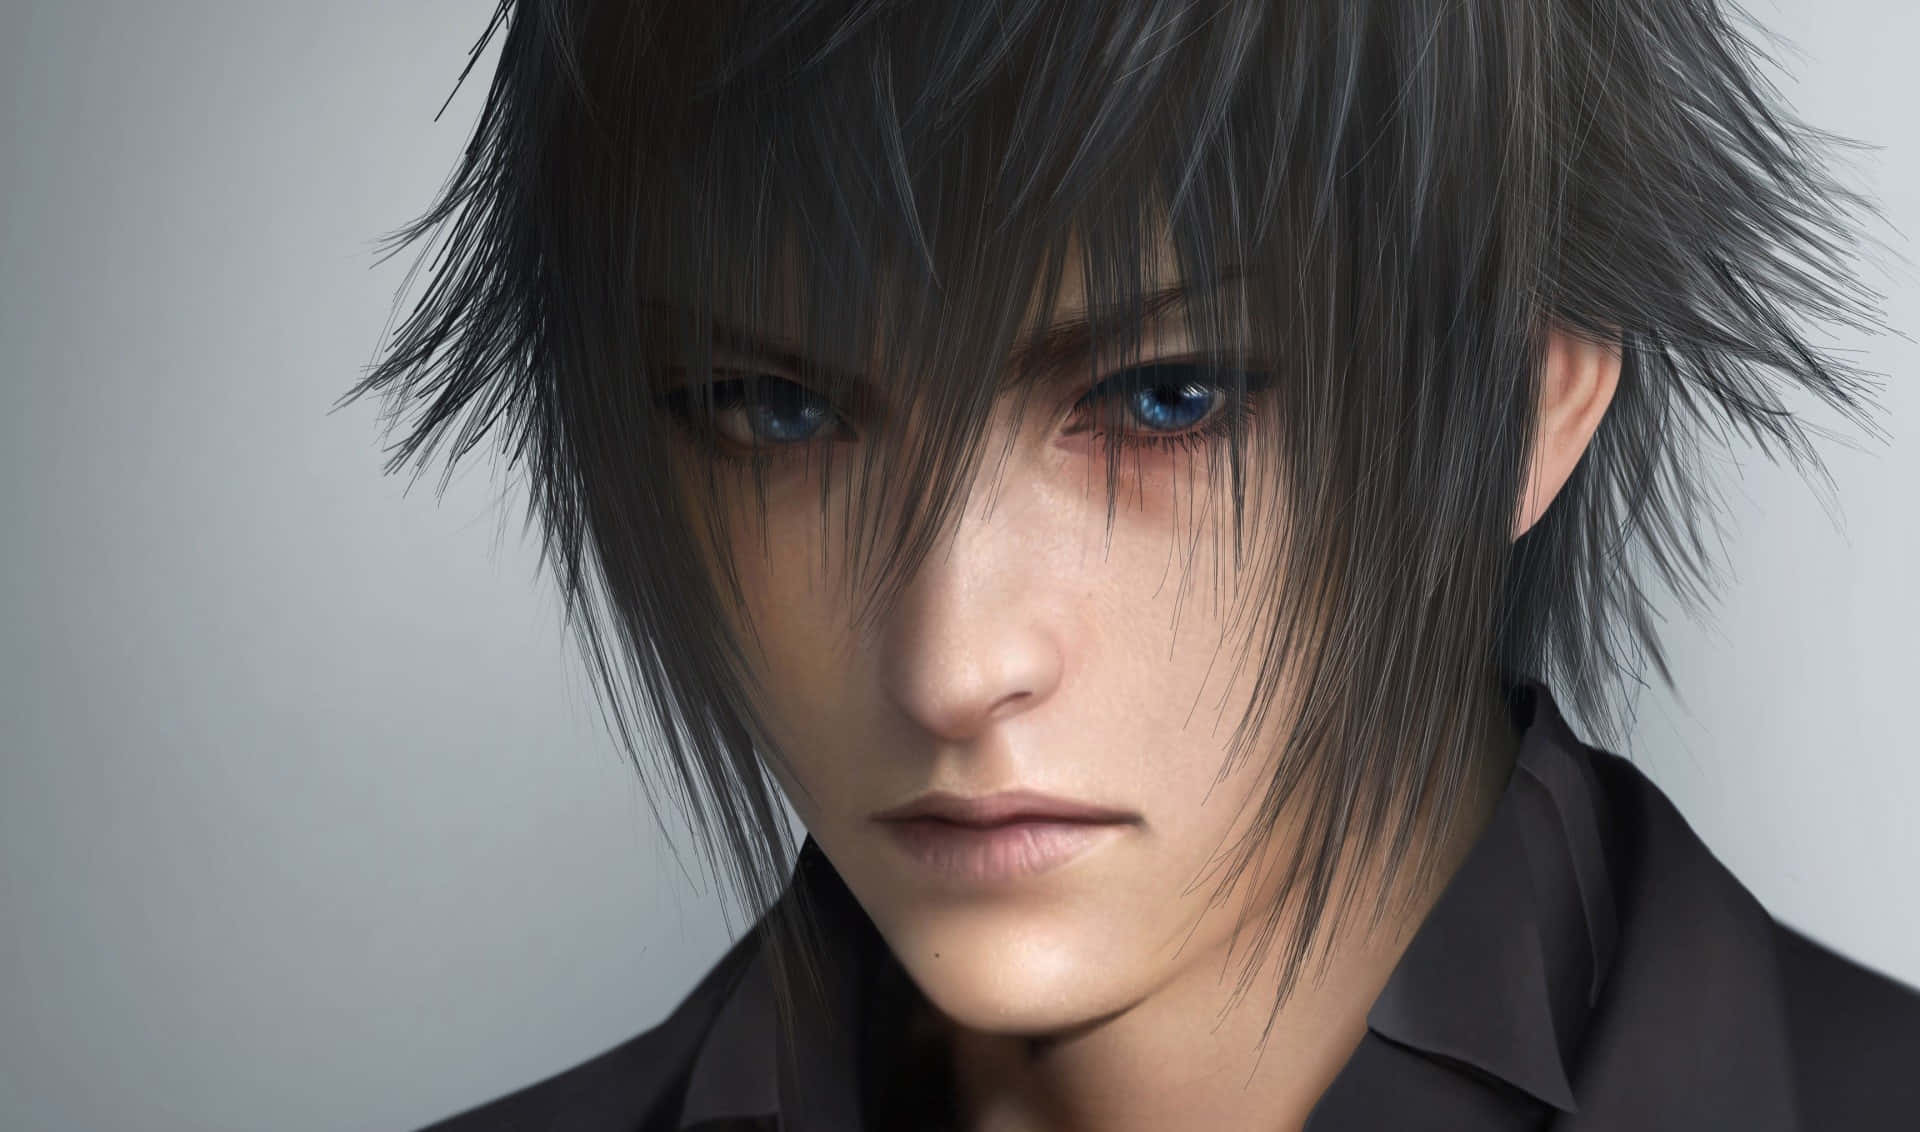 Play Final Fantasy 15 and Feel the Adventure Wallpaper